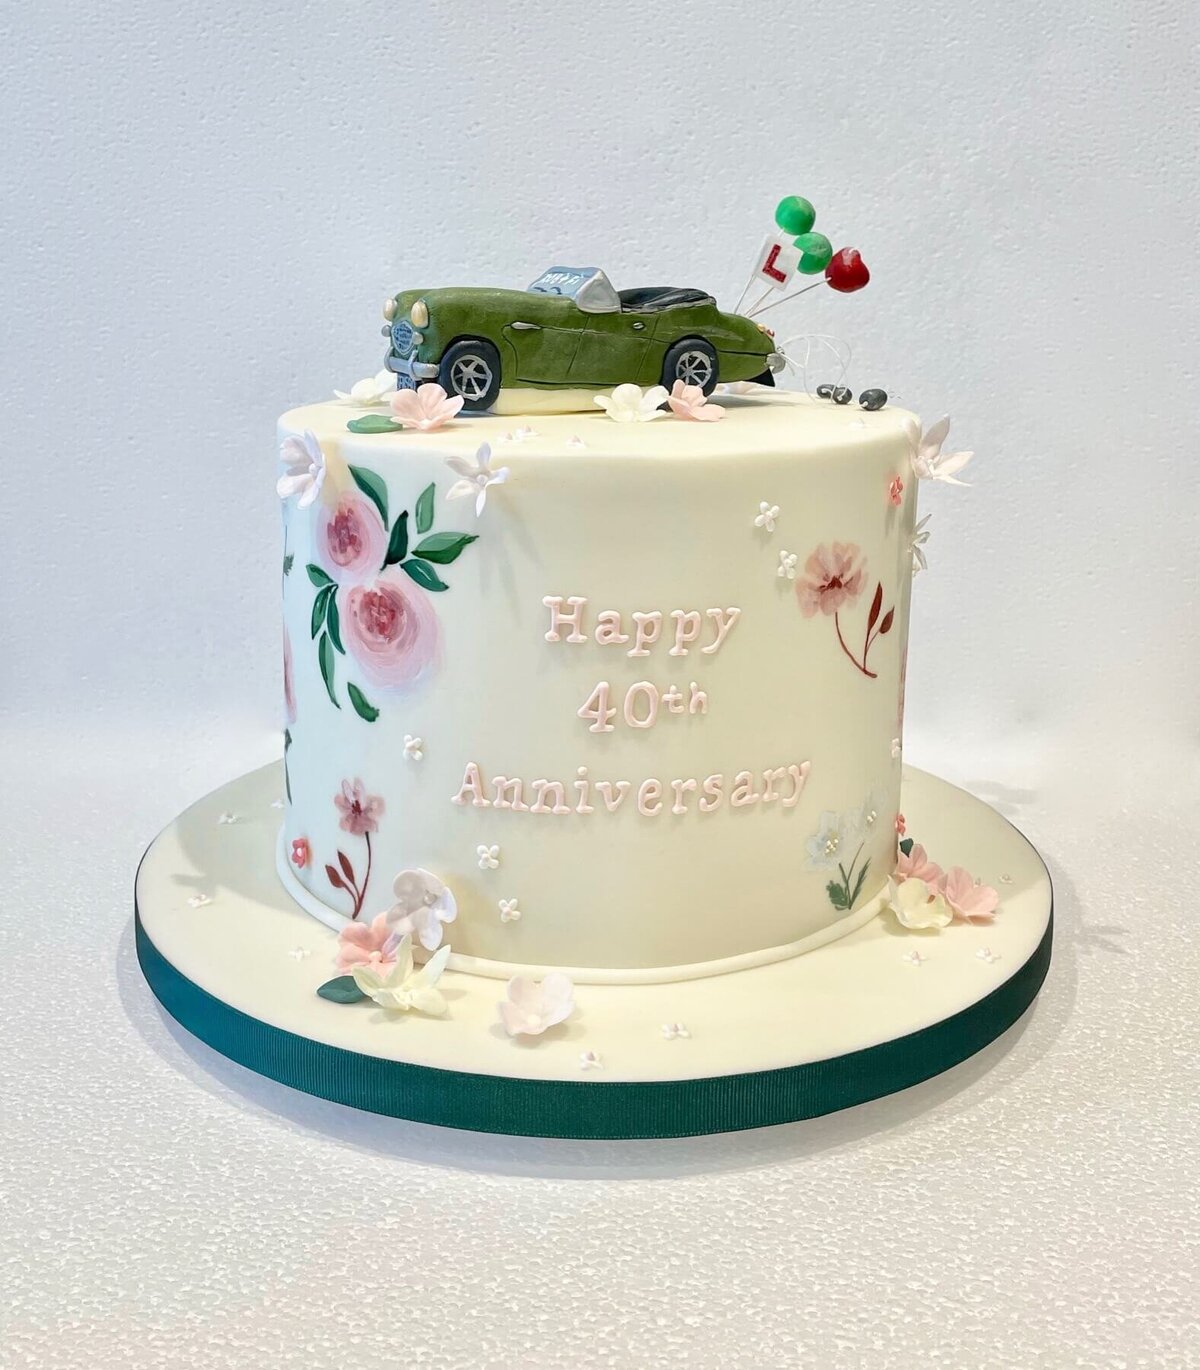 A hand painted birthday cake with delicate sugar flowers and a car on top